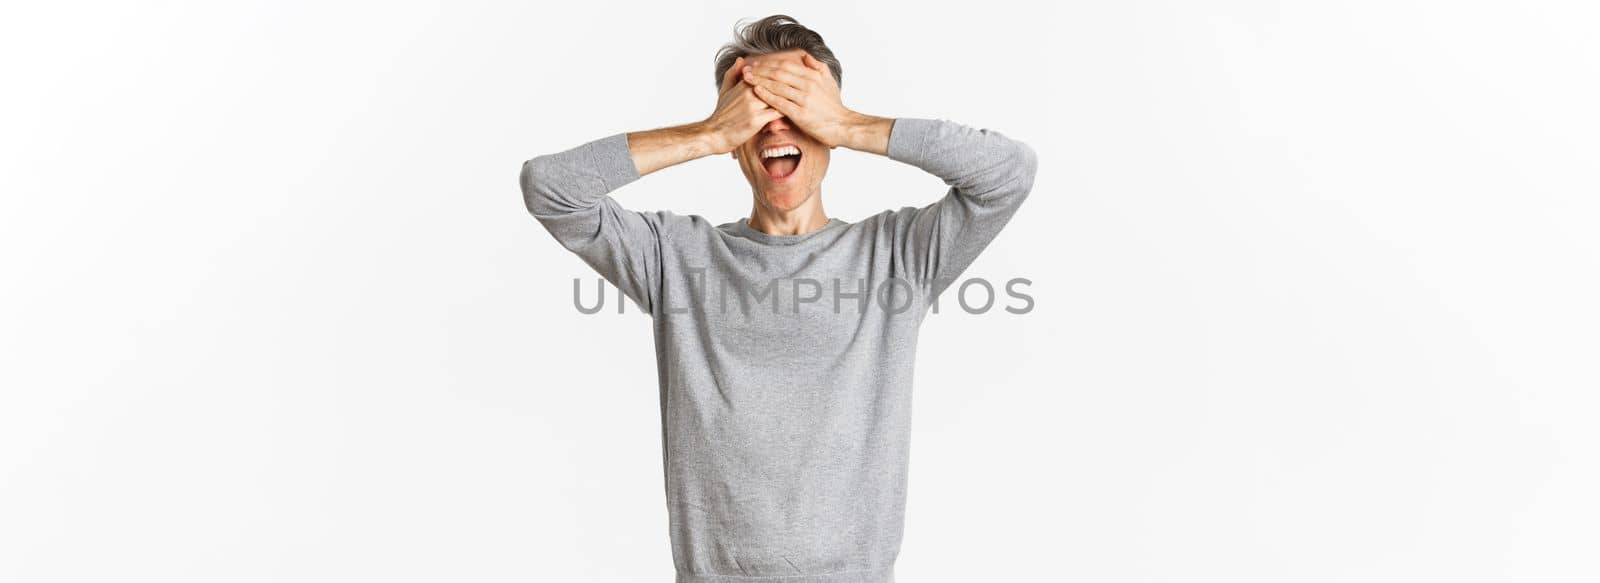 Portrait of happy middle-aged man waiting for surprise, shut eyes and smiling, playing hide n seek, standing over white background.